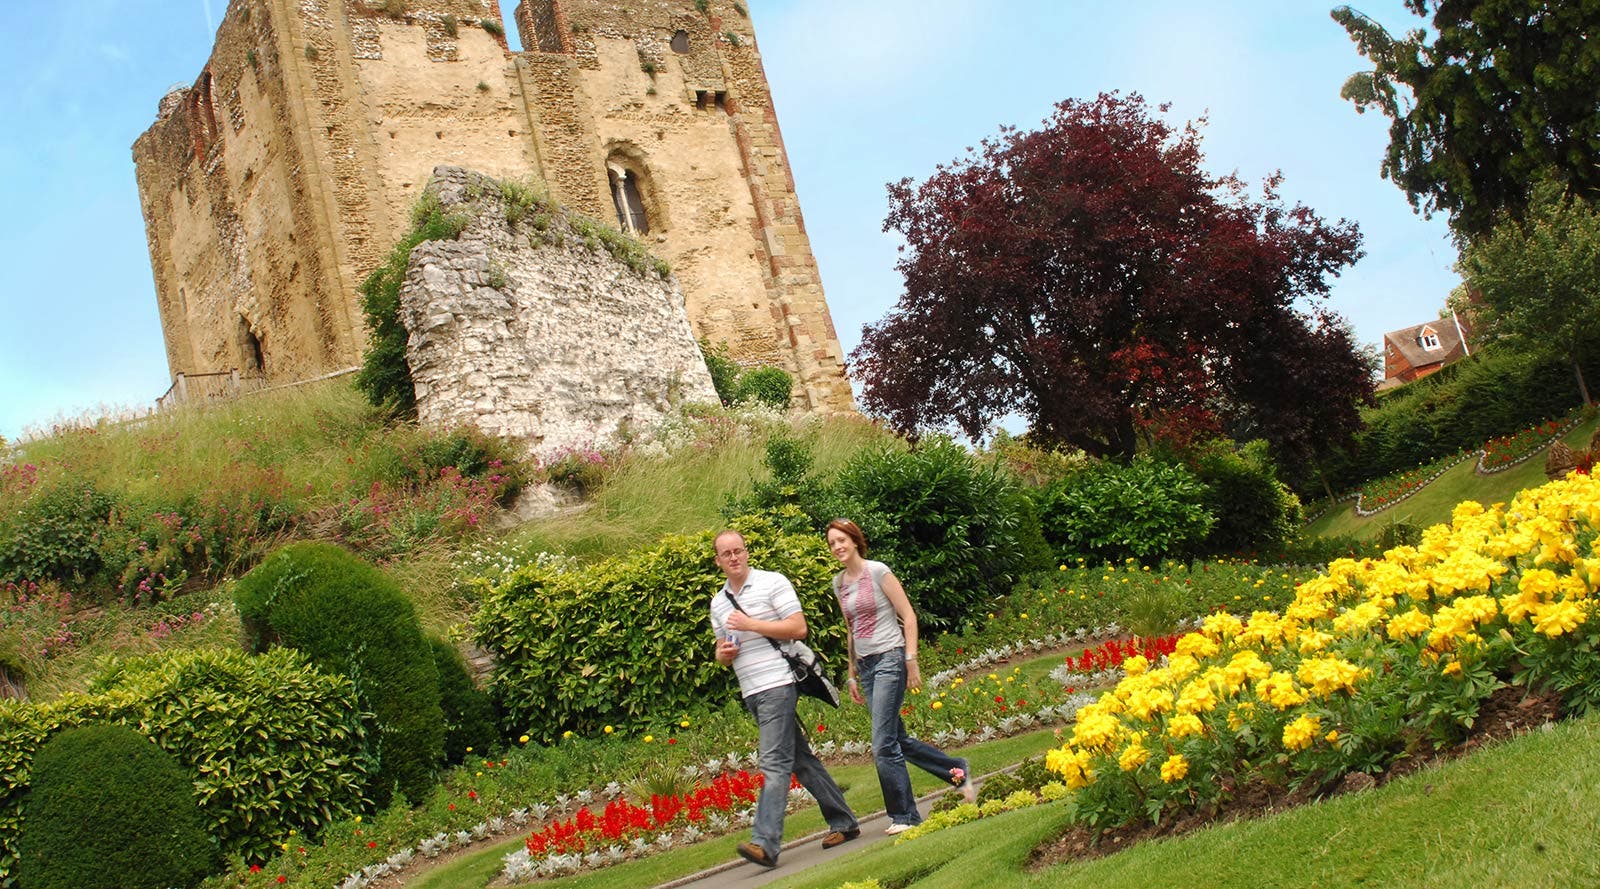 Students walking in front of castle in Surrey